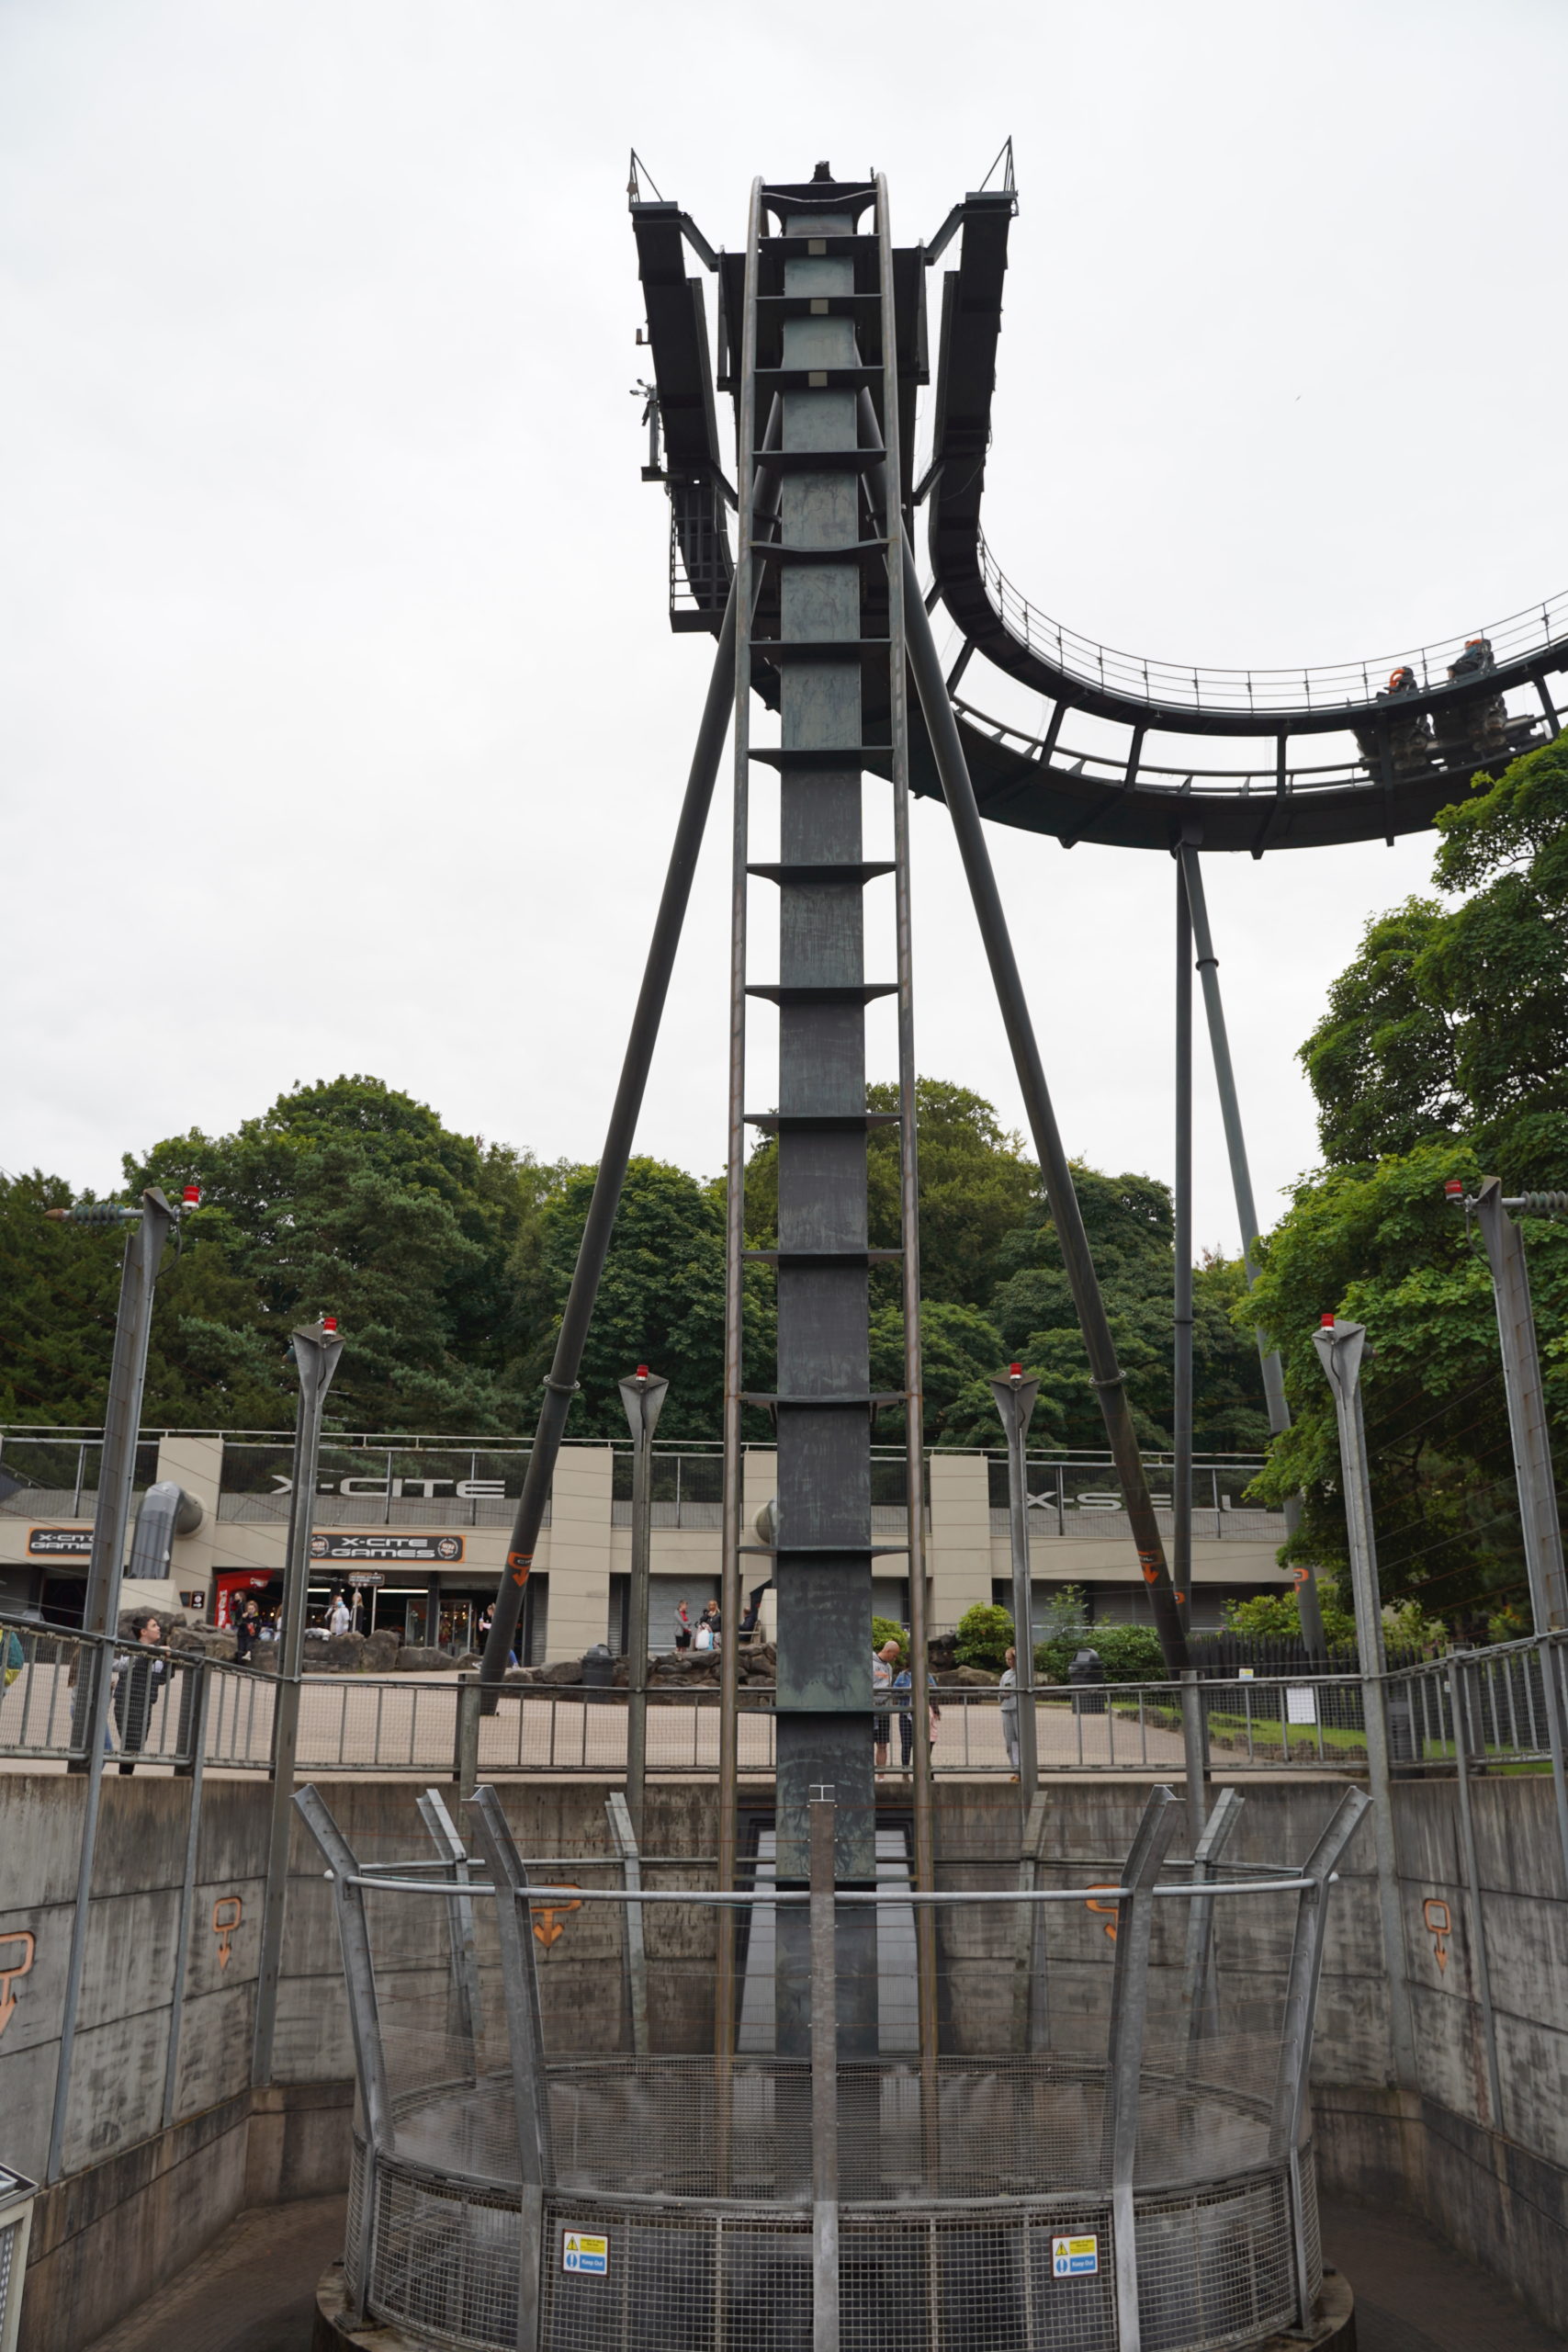 Alton Towers Trip Report  3 - 4th August 2020 - Expedition Theme Park